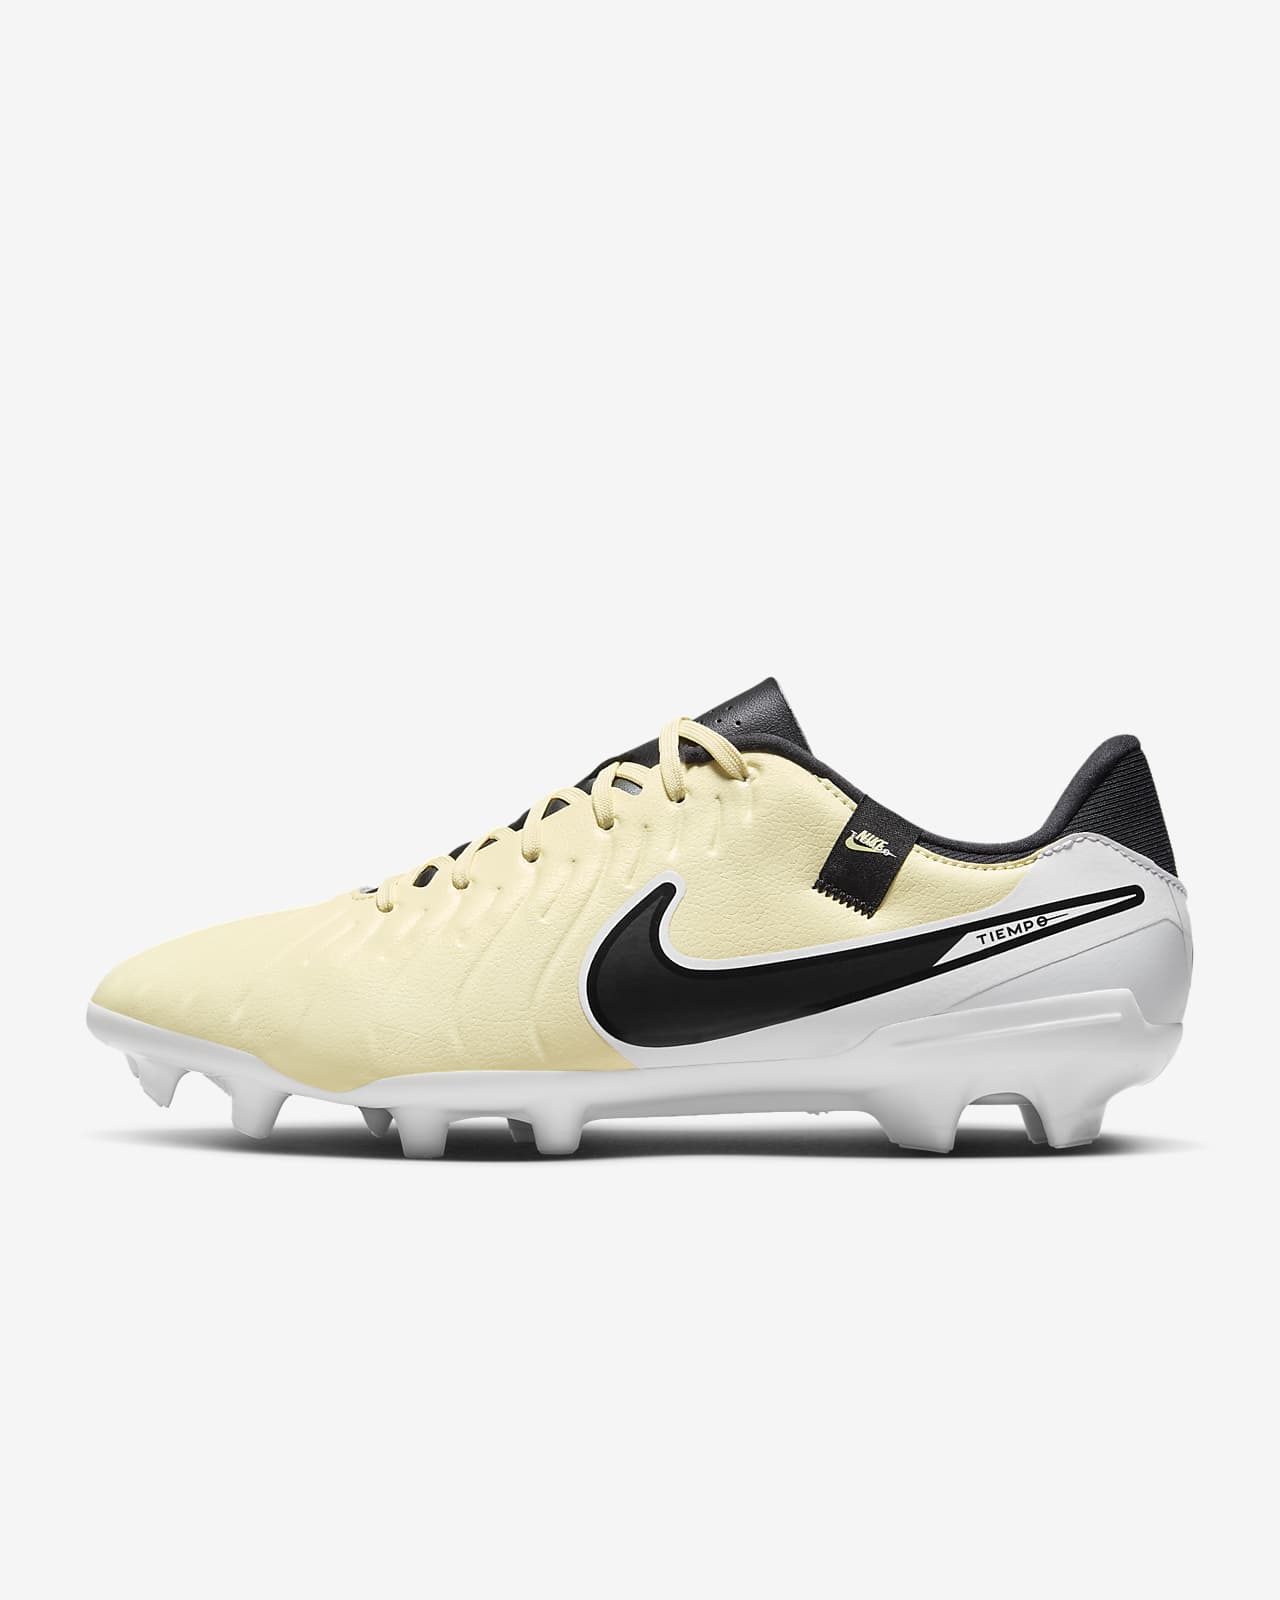 Cleats. Academy Nike Low-Top Tiempo Legend Soccer 10 Multi-Ground